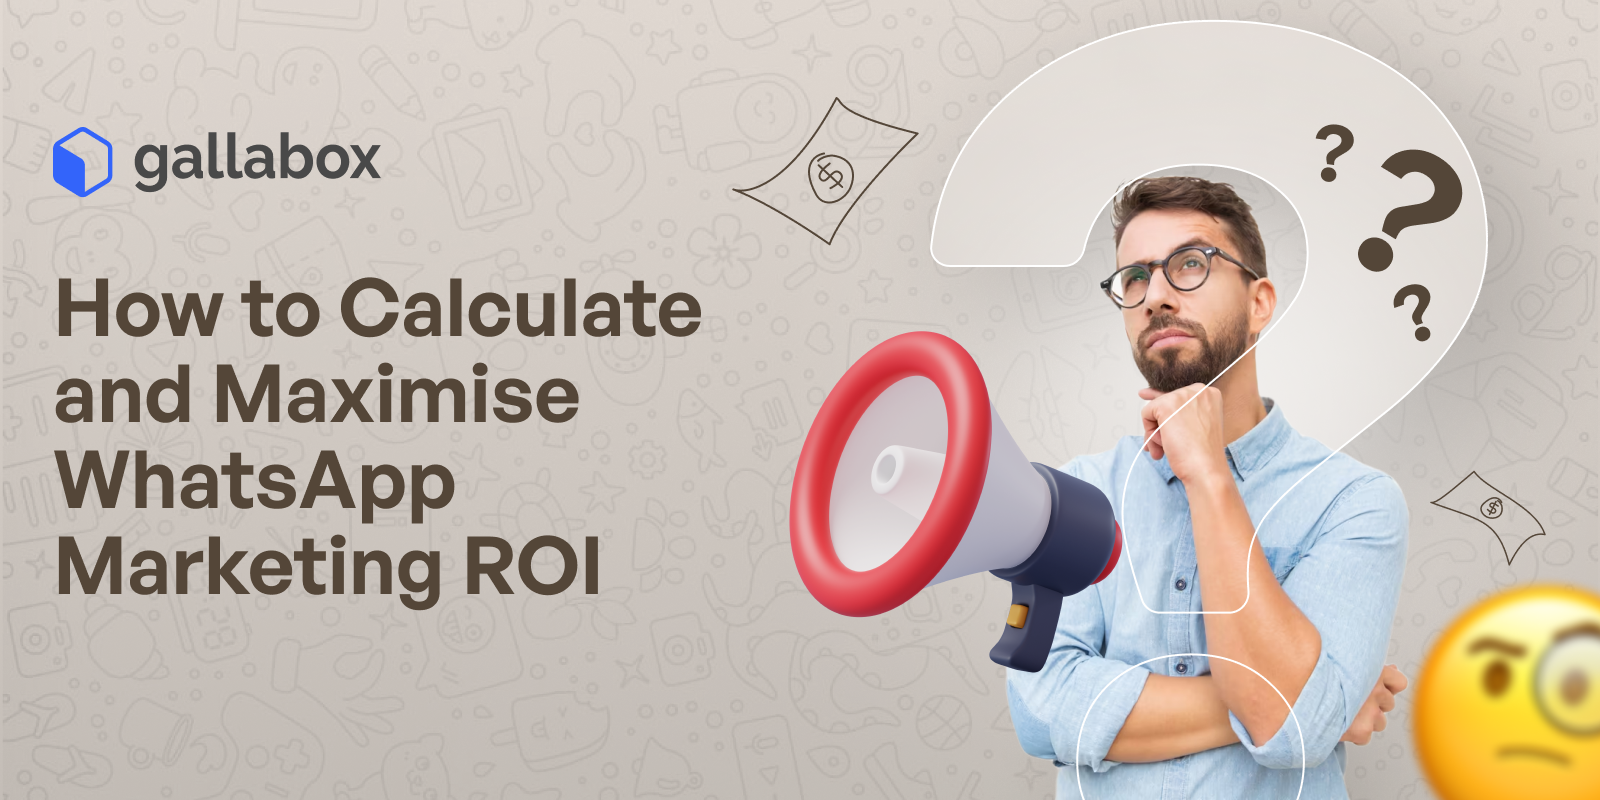 How to Calculate and Maximise WhatsApp Marketing ROI